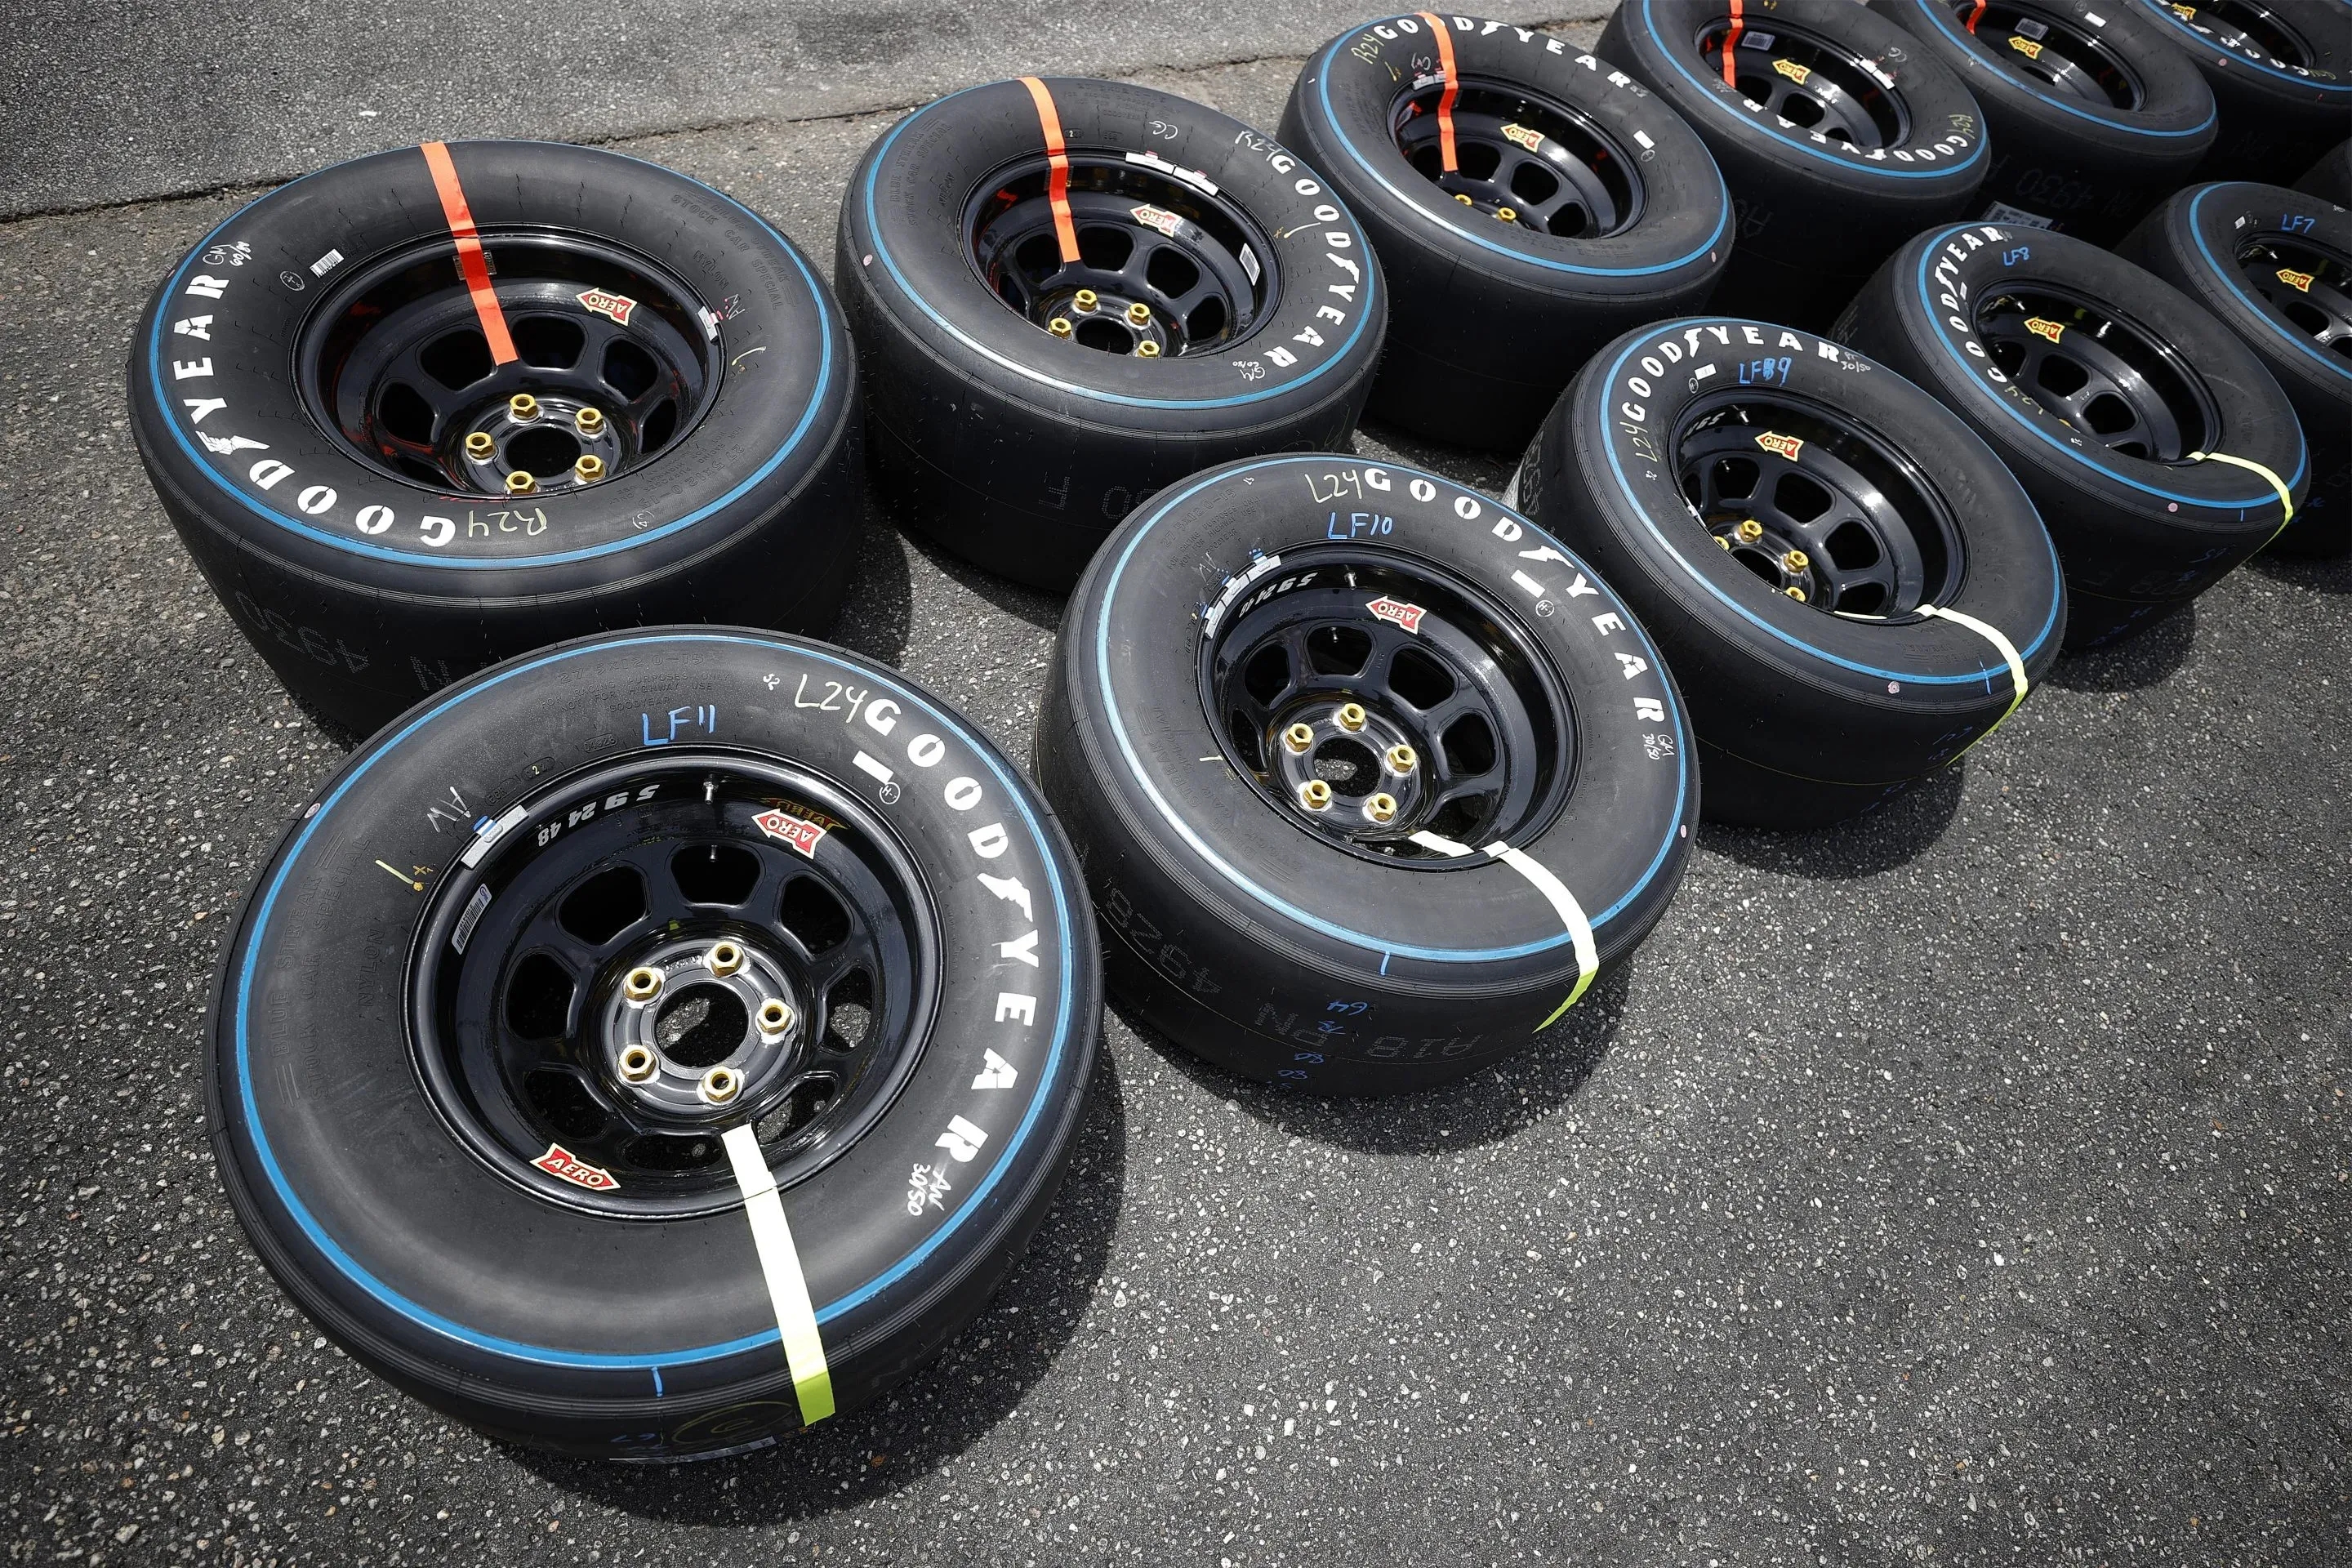 Goodyear Q1 2022 turned out to be really good: USD 4.9 billion revenue generated